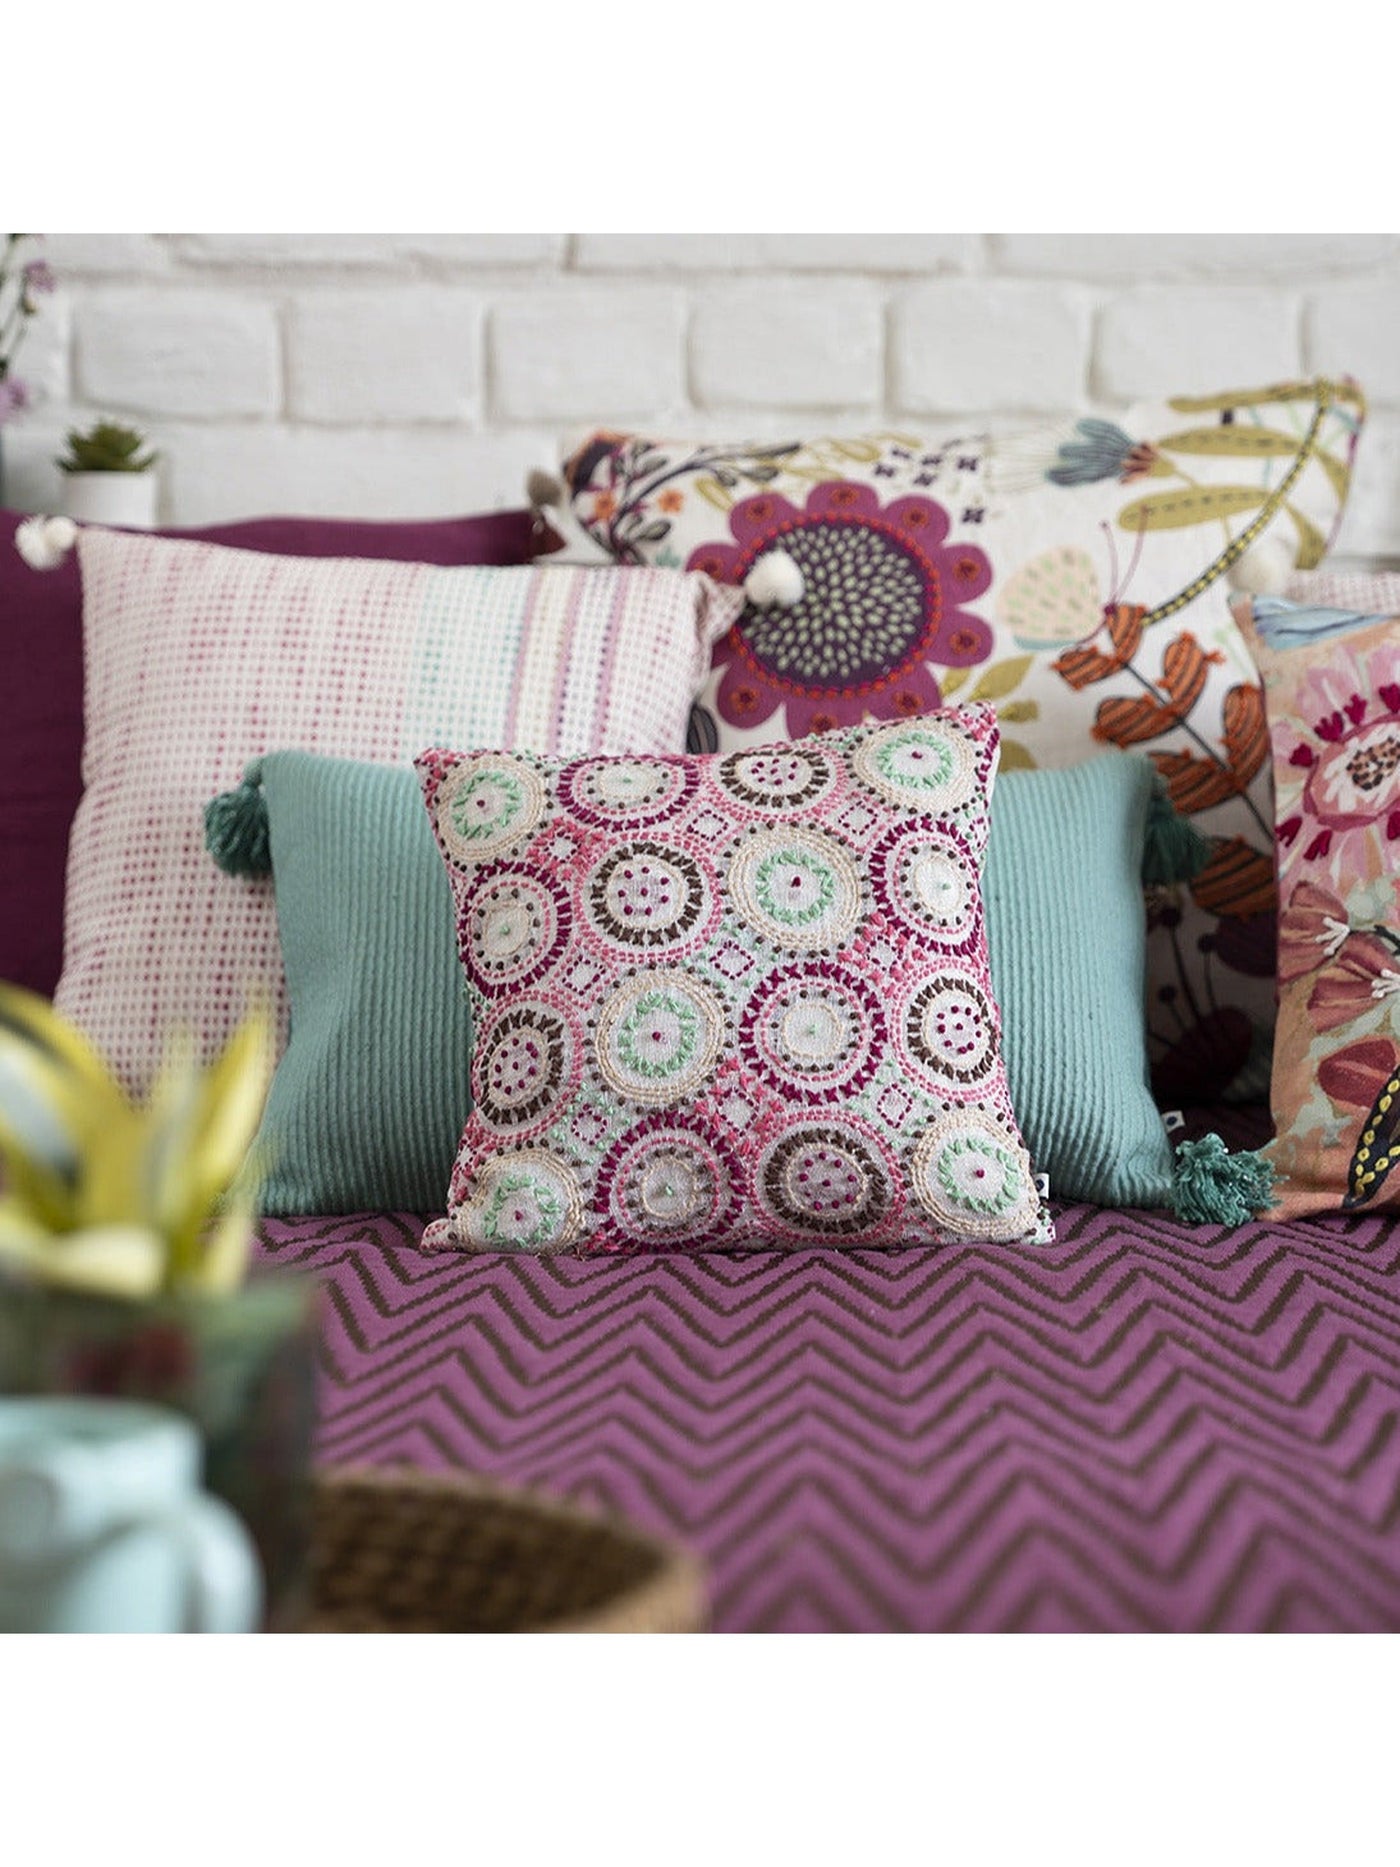 Cushion Cover - Ripples Floral